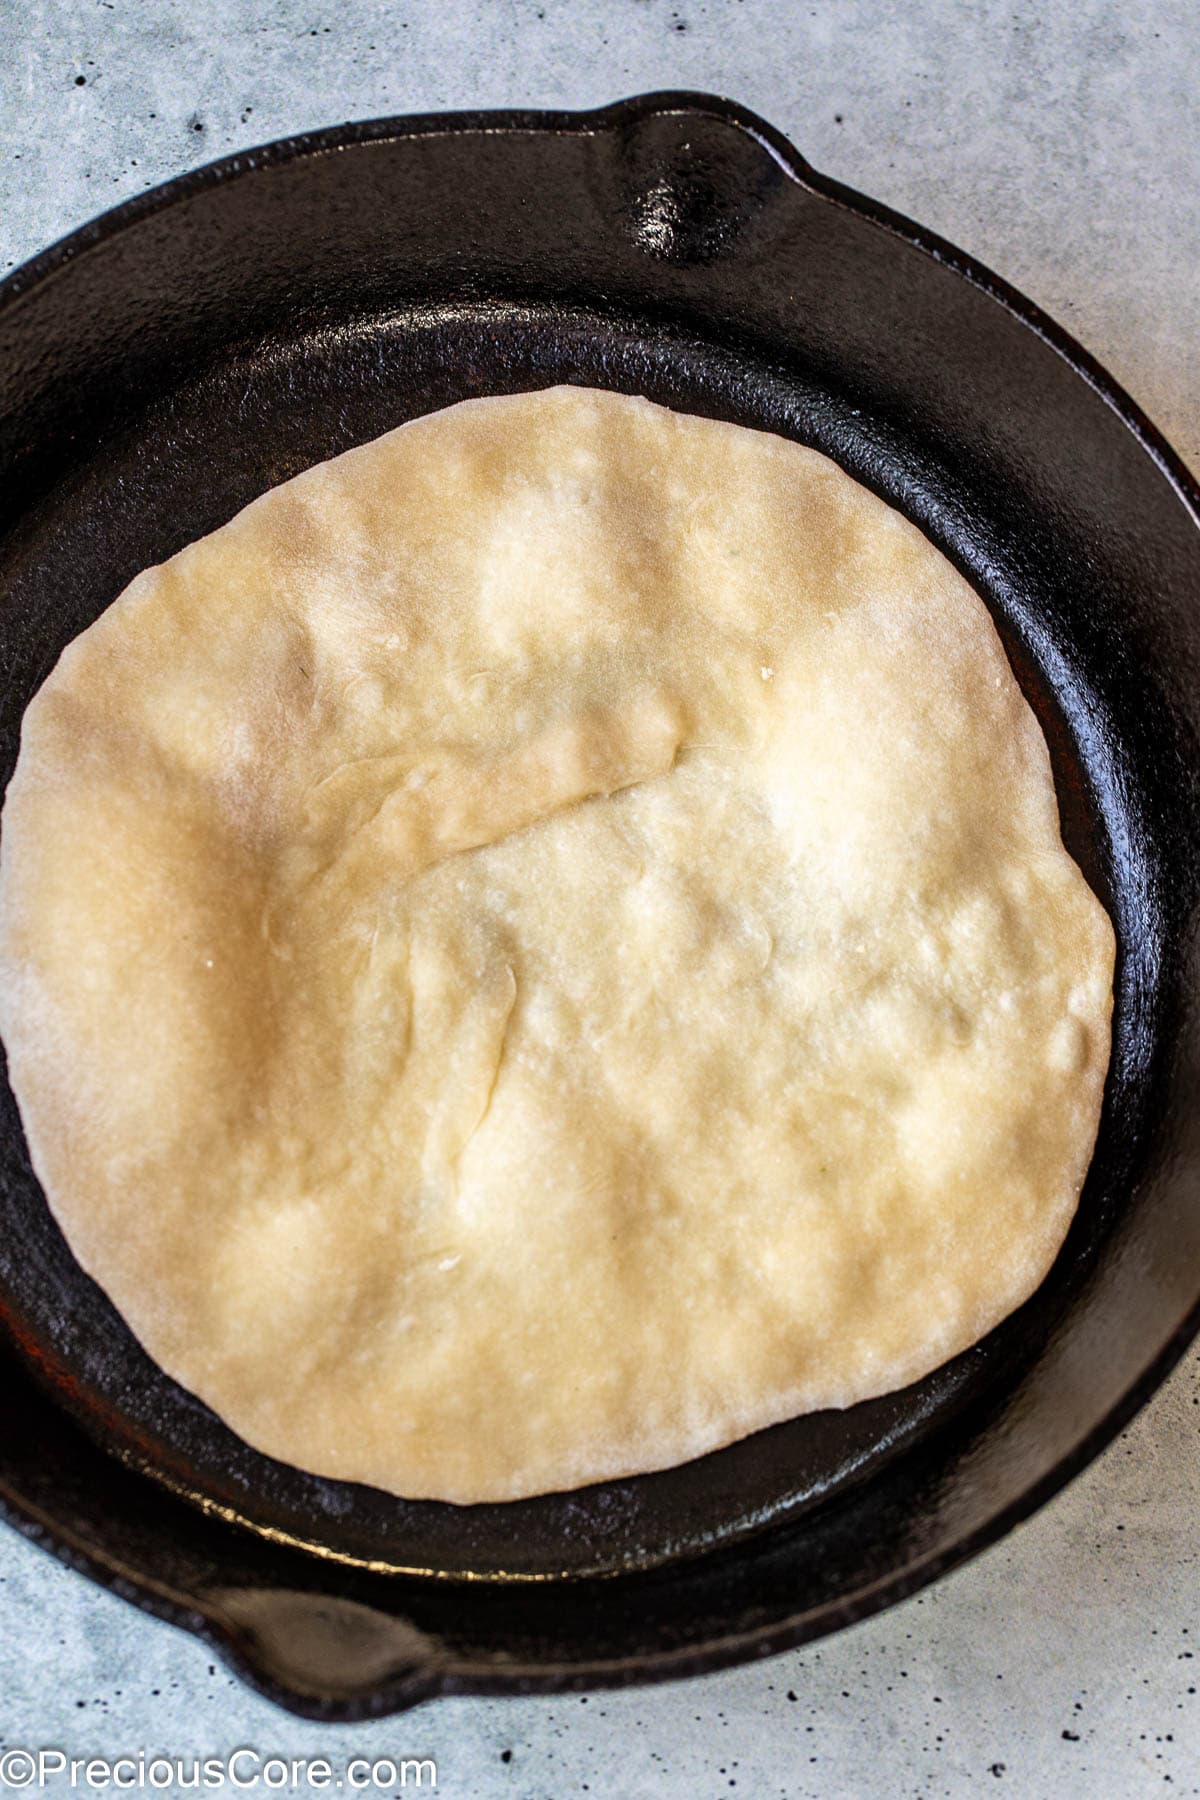 Shawarma bread cooking in a skillet.